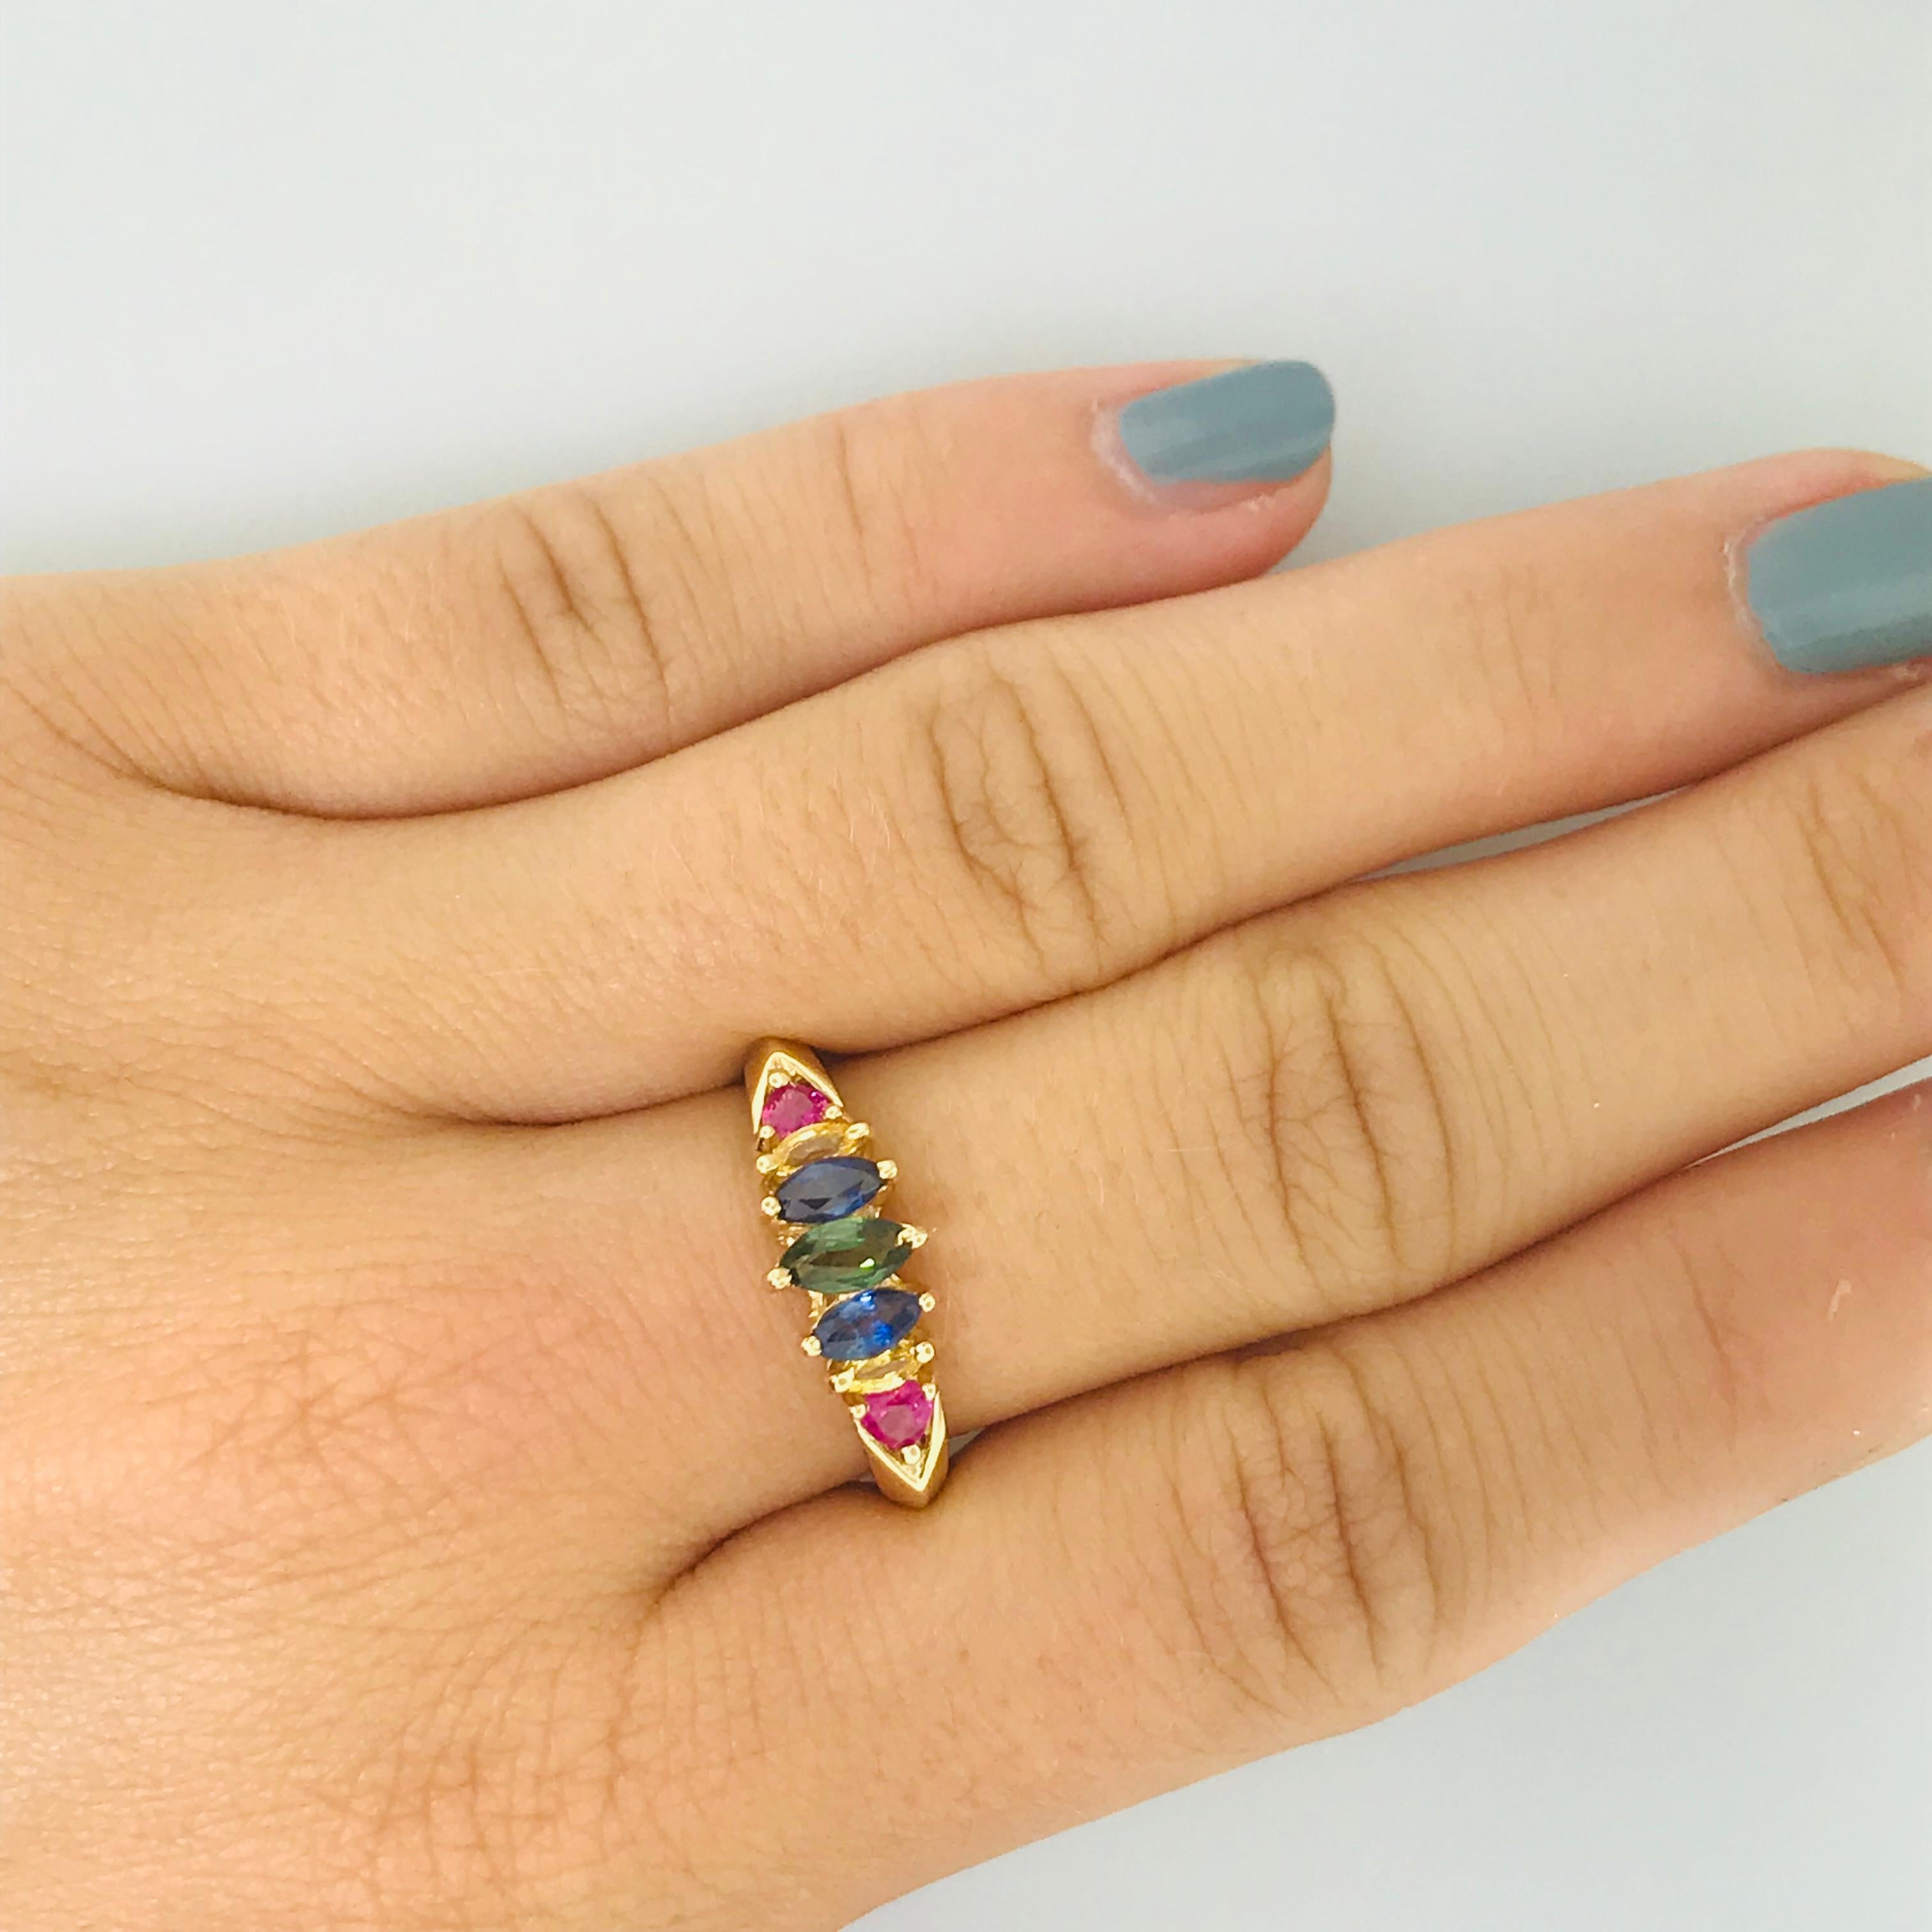 The latest fashion trends have involved a variety of fun colors and rainbow designs. Rainbow is in! And it’s here to stay and have fun! This estate rainbow ring was once all the rage and it hasn’t lost its touch since, its rainbow design is still